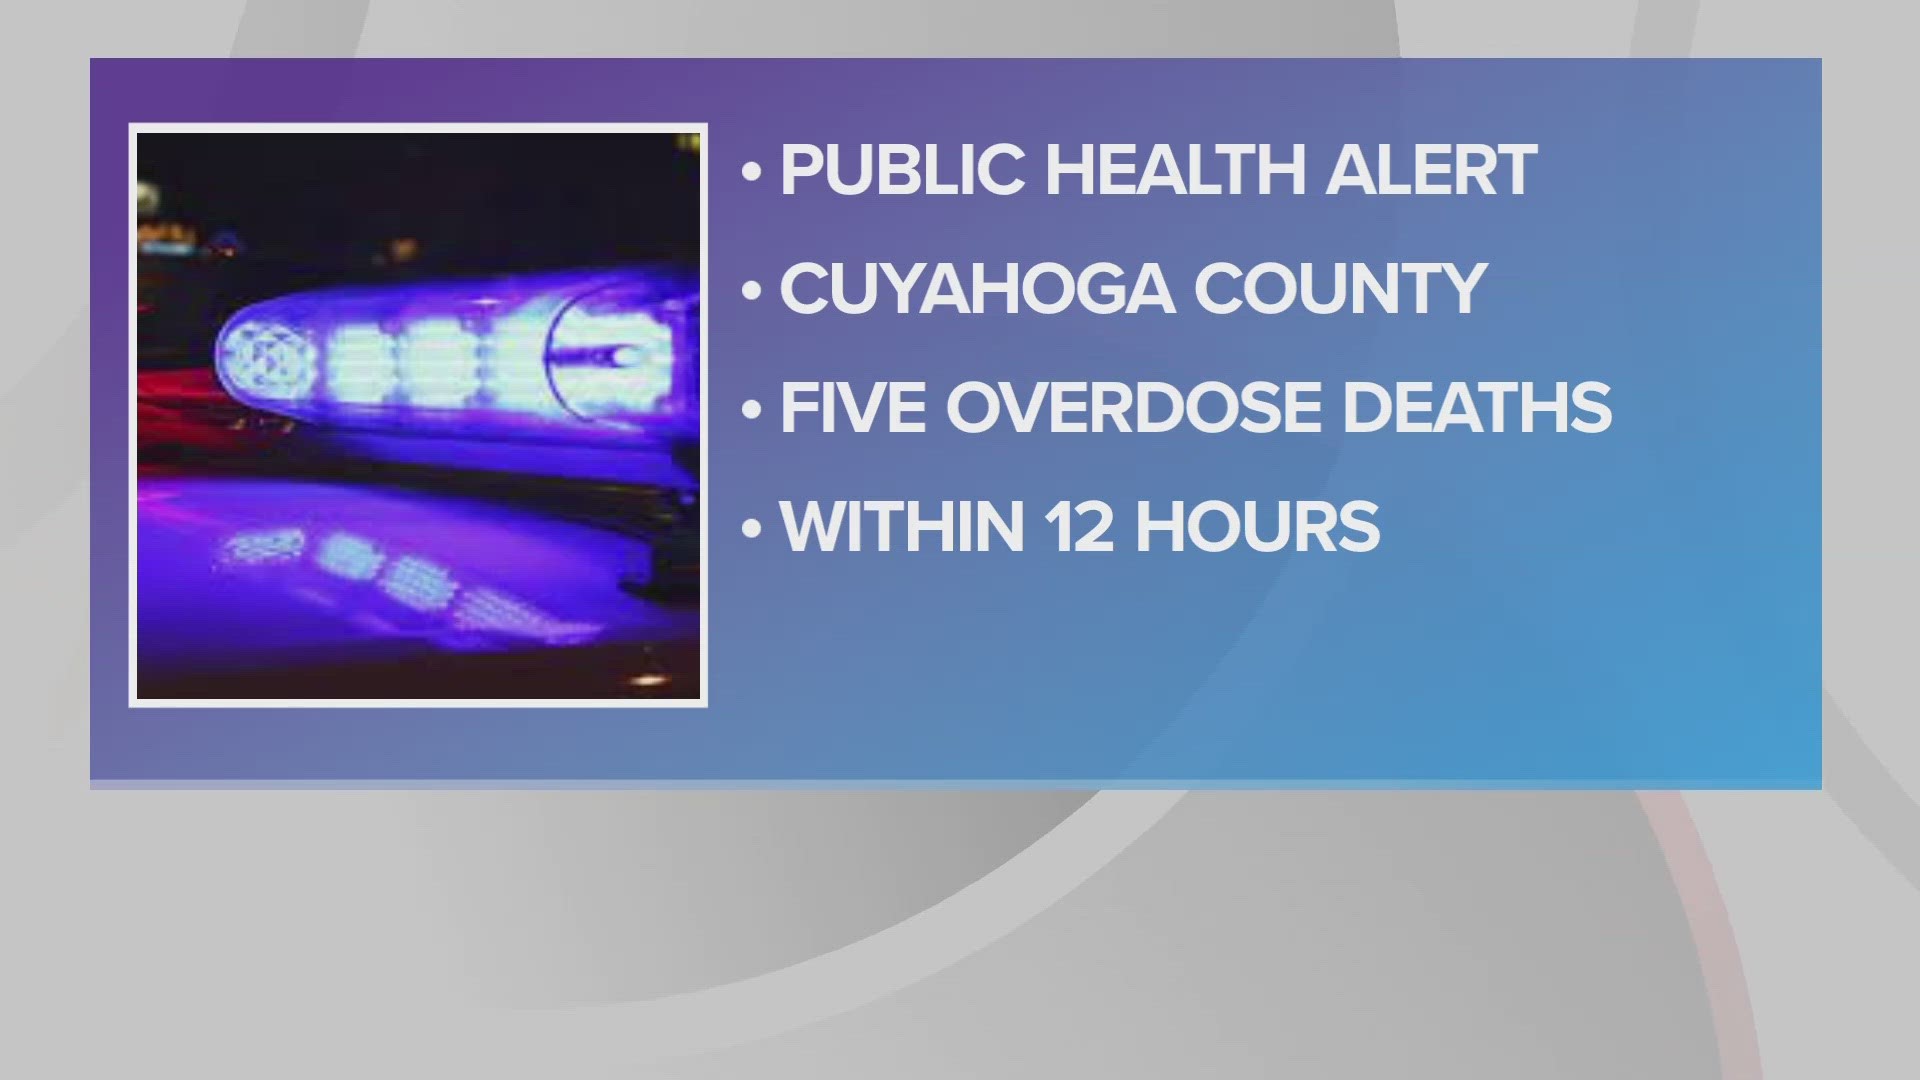 The alert comes after five suspected overdoses happened within a 12-hour period.